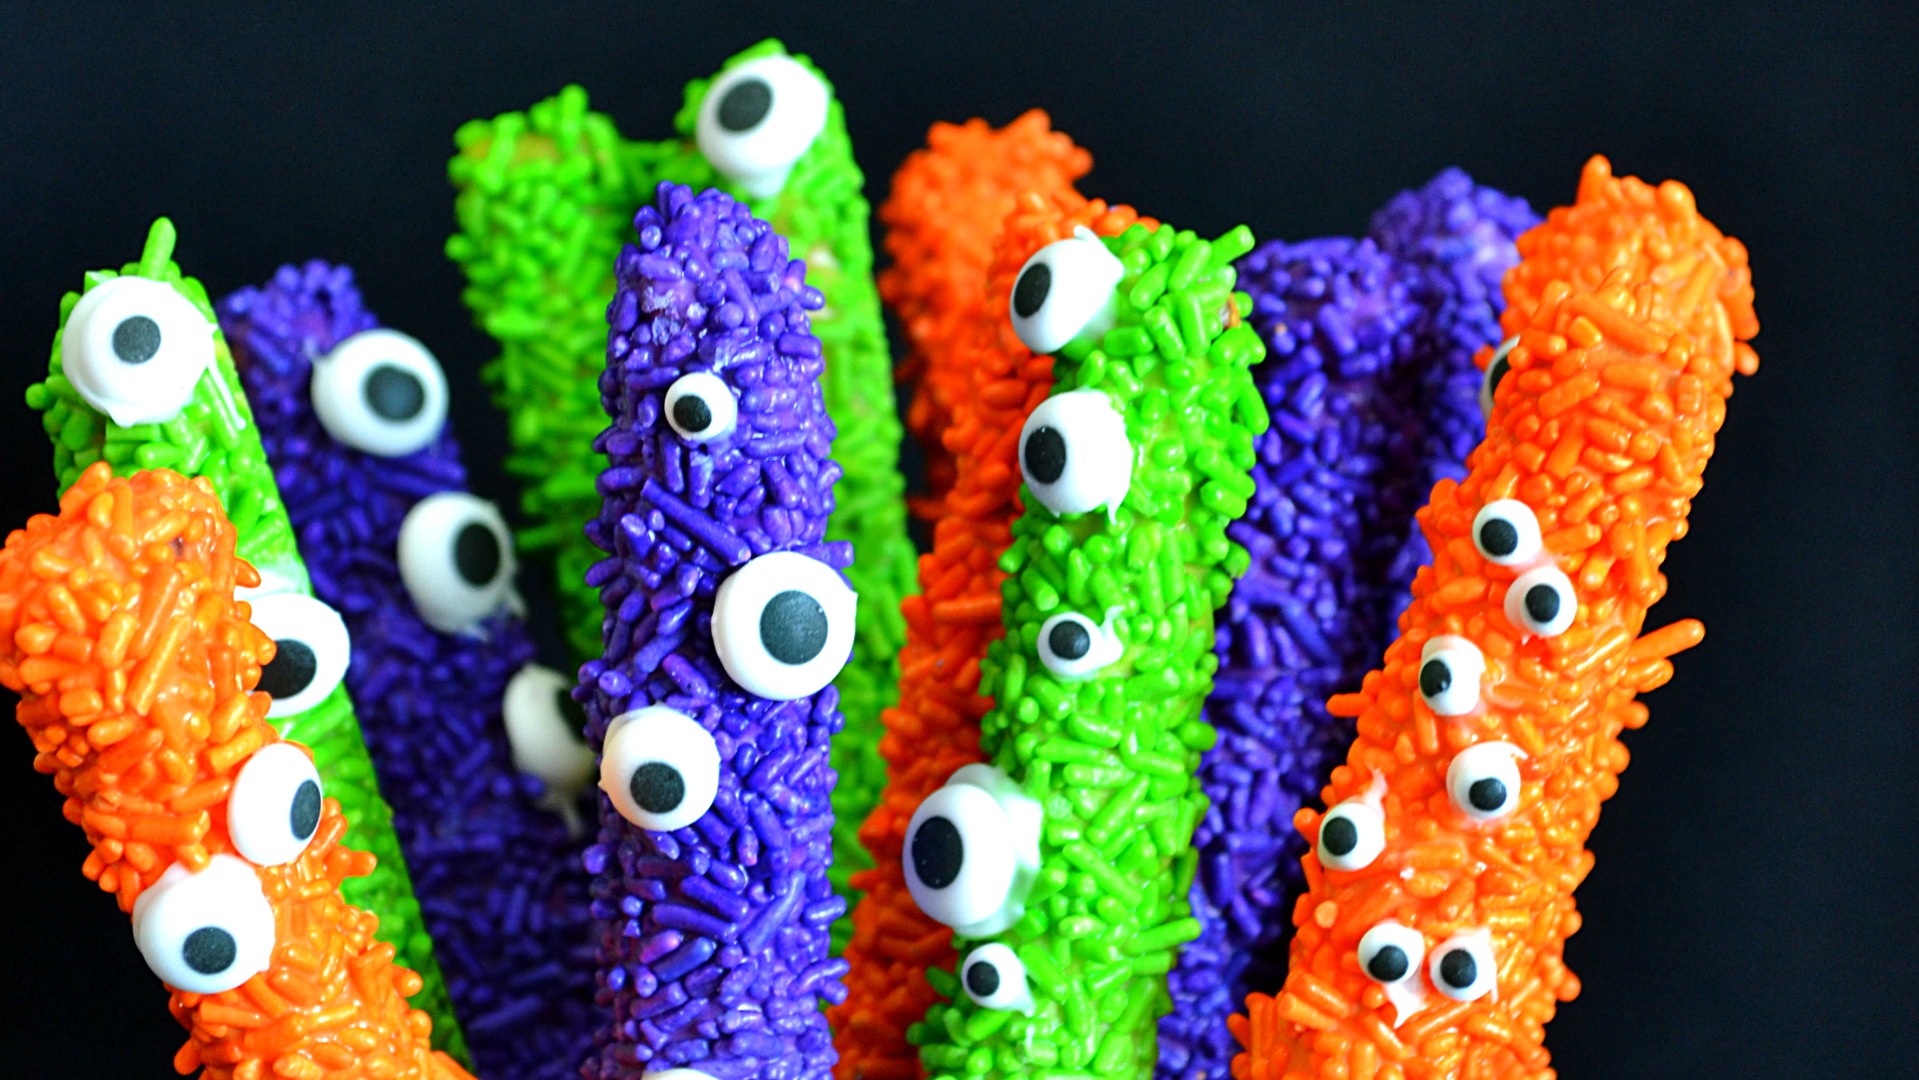 7 Decorated Halloween Pretzels | These easy to make inexpensive treats are perfect for your neighborhood trick or treaters, as a Halloween party favor or that easy addition to a dessert table.